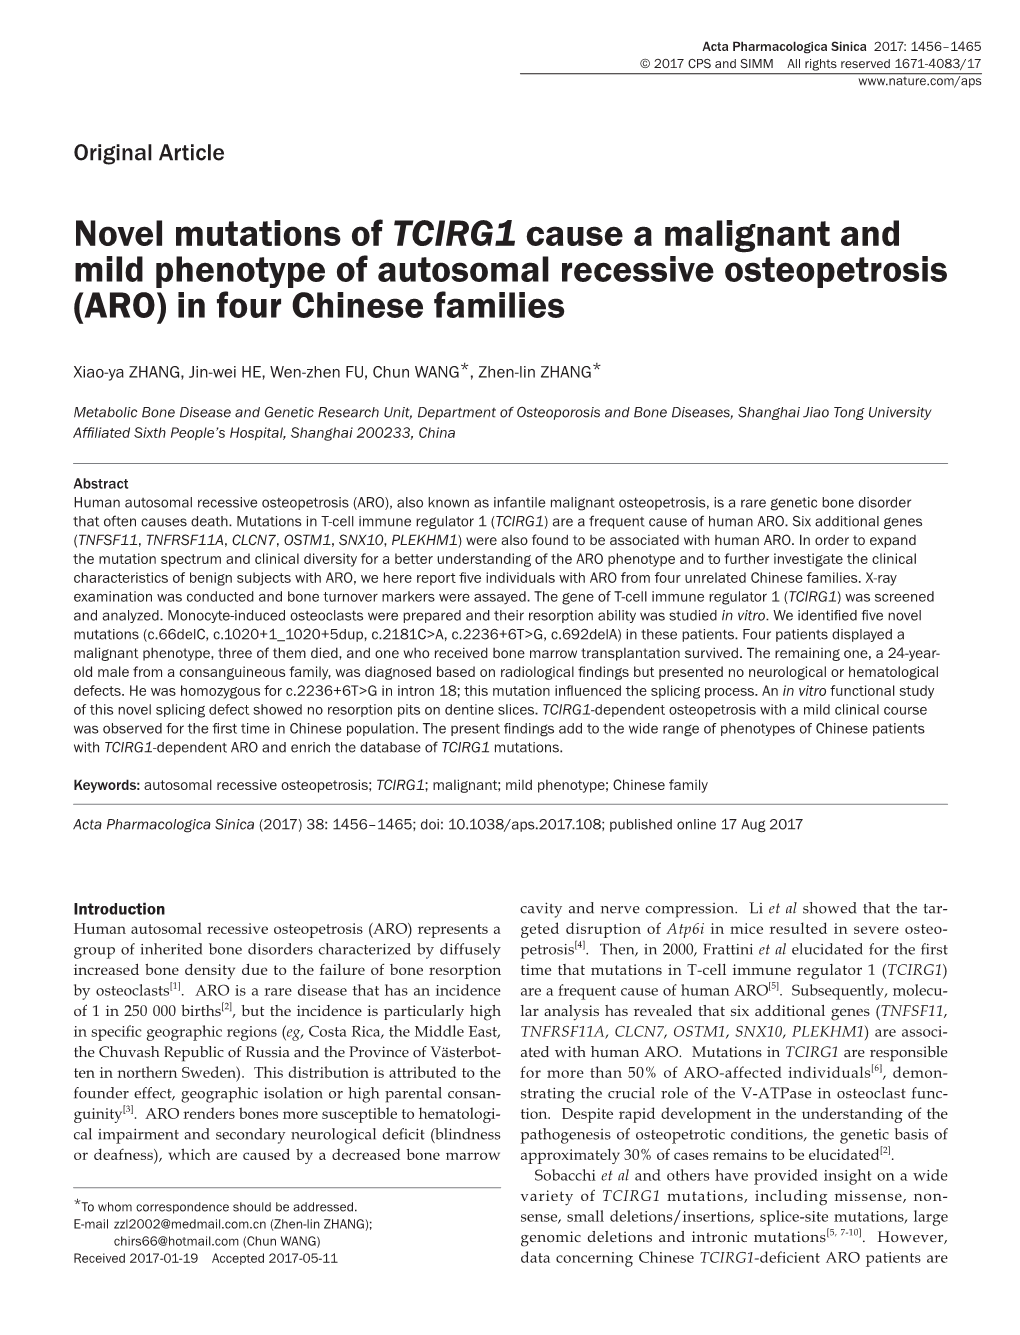 Novel Mutations of TCIRG1 Cause a Malignant and Mild Phenotype of Autosomal Recessive Osteopetrosis (ARO) in Four Chinese Families